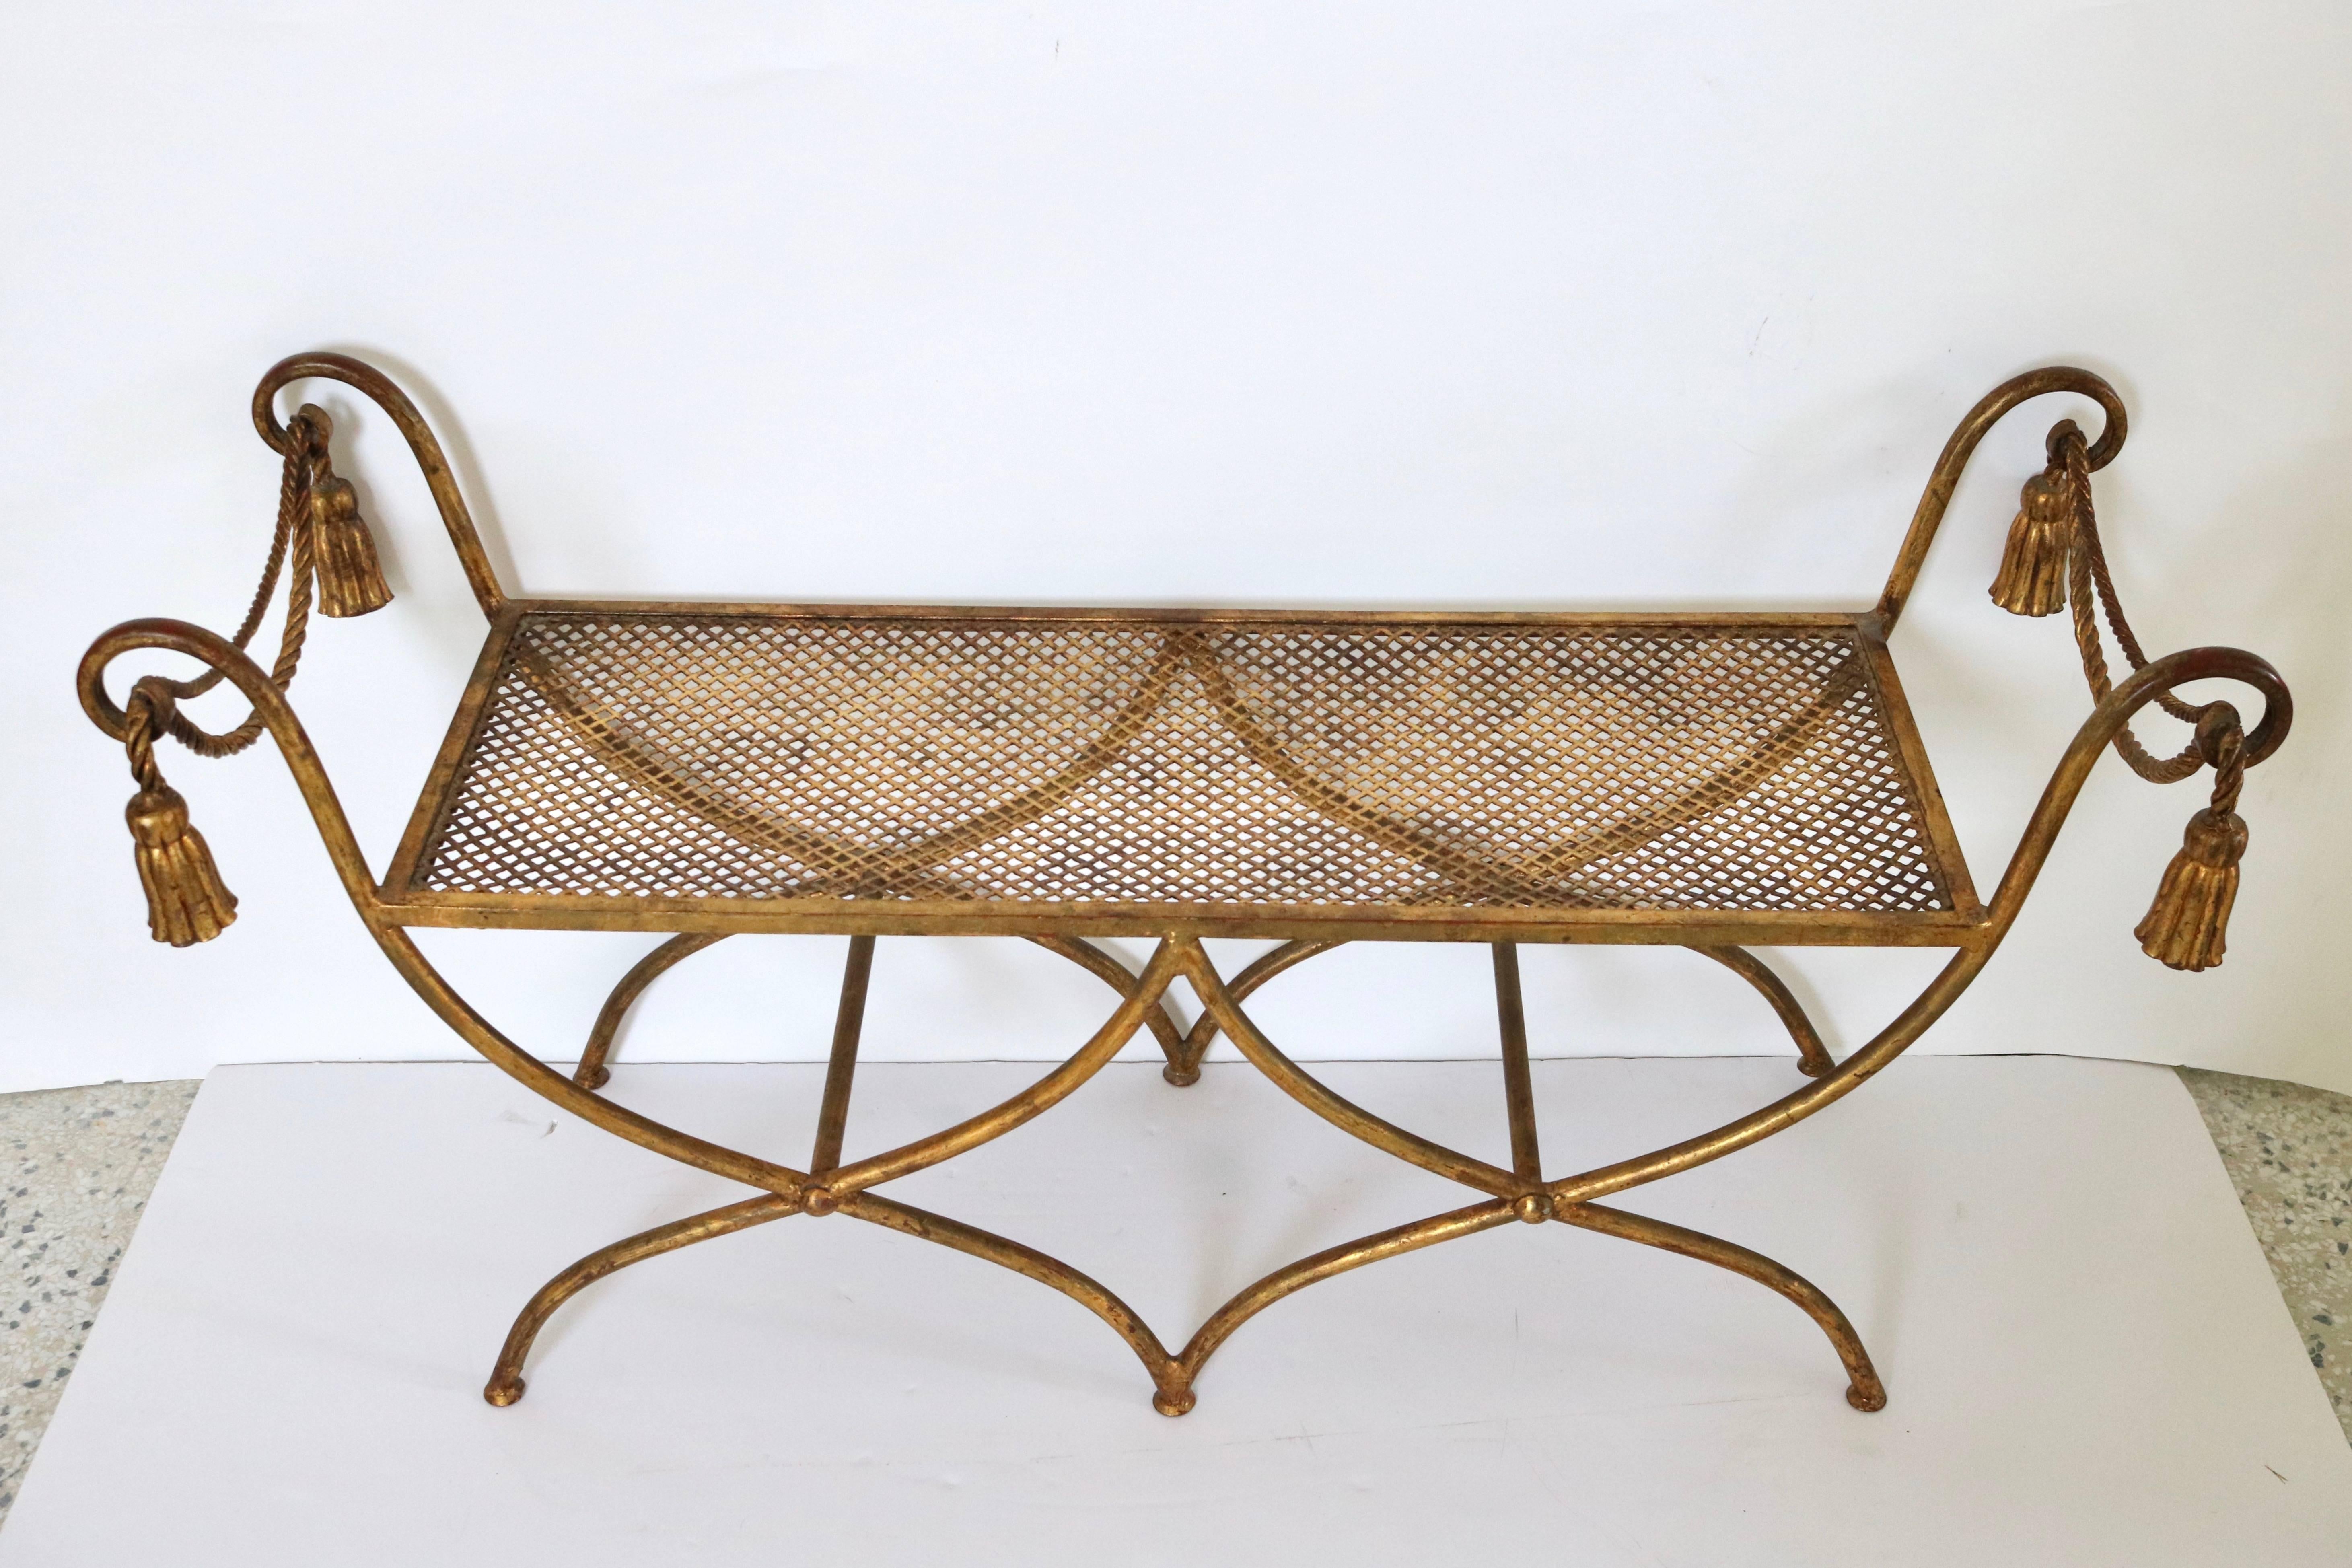 This stylish Hollywood Regency style bench dates from the 1960s and will make the perfect piece for the entry hall, vestibule or perhaps at the end of the bed.
The fabric is a woven texture in a soft apricot coloration which compliments the gold